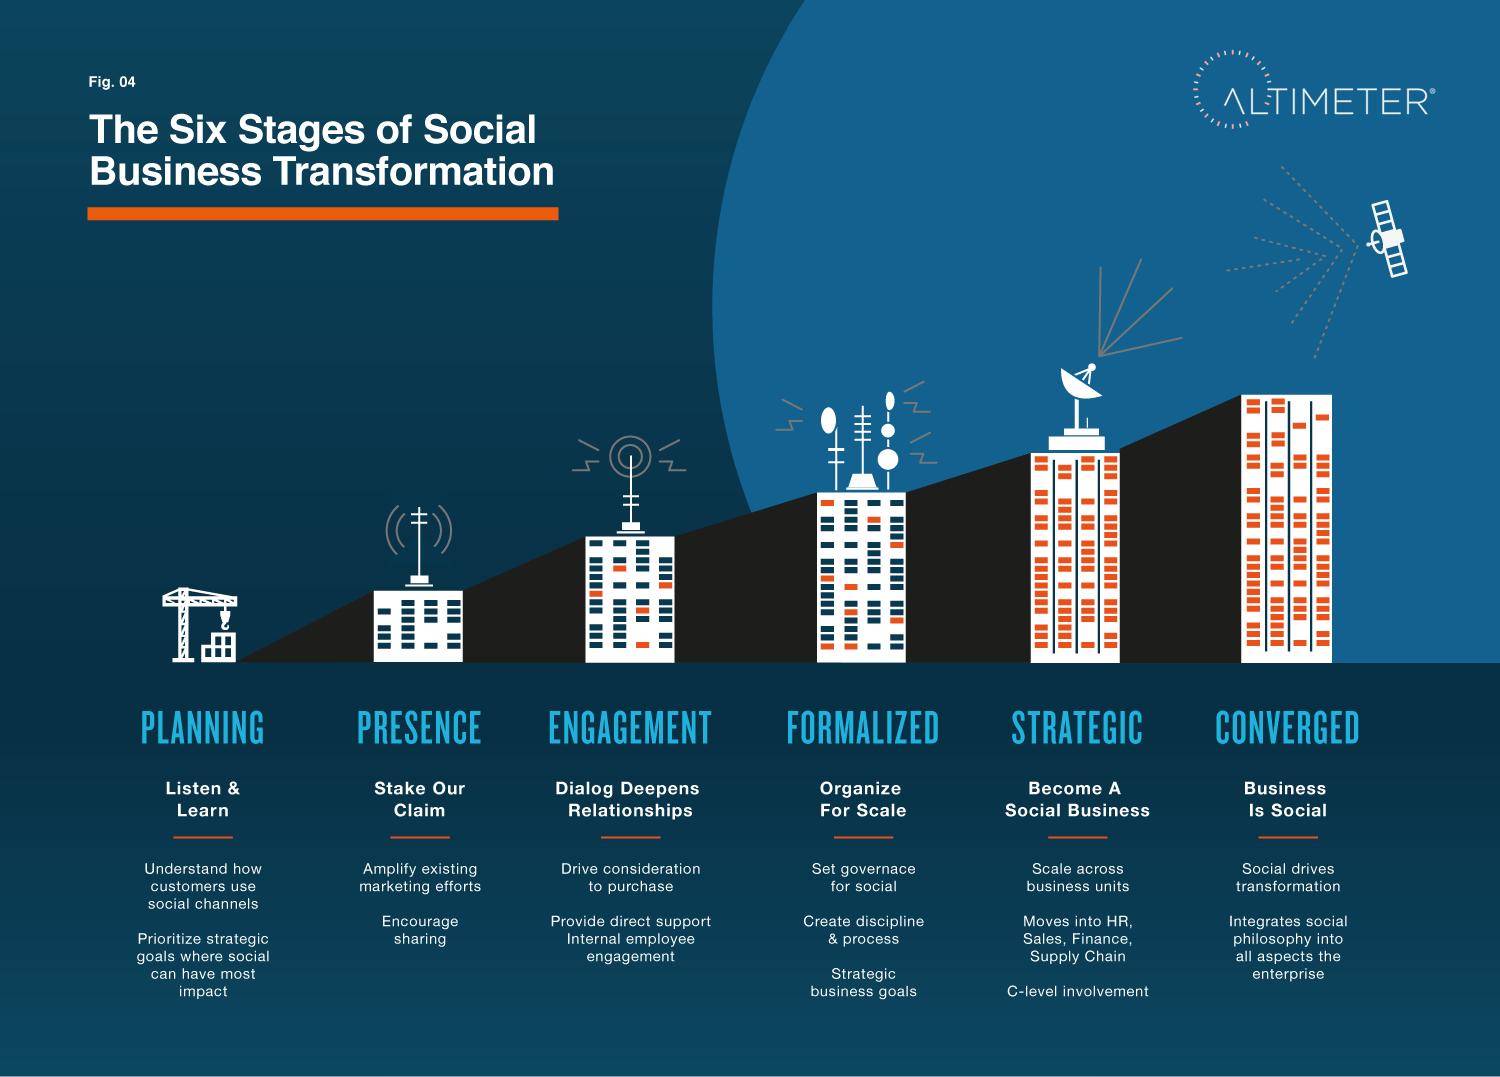 Altimeter Group: The 6 stages of Social Business Transformation, 2013